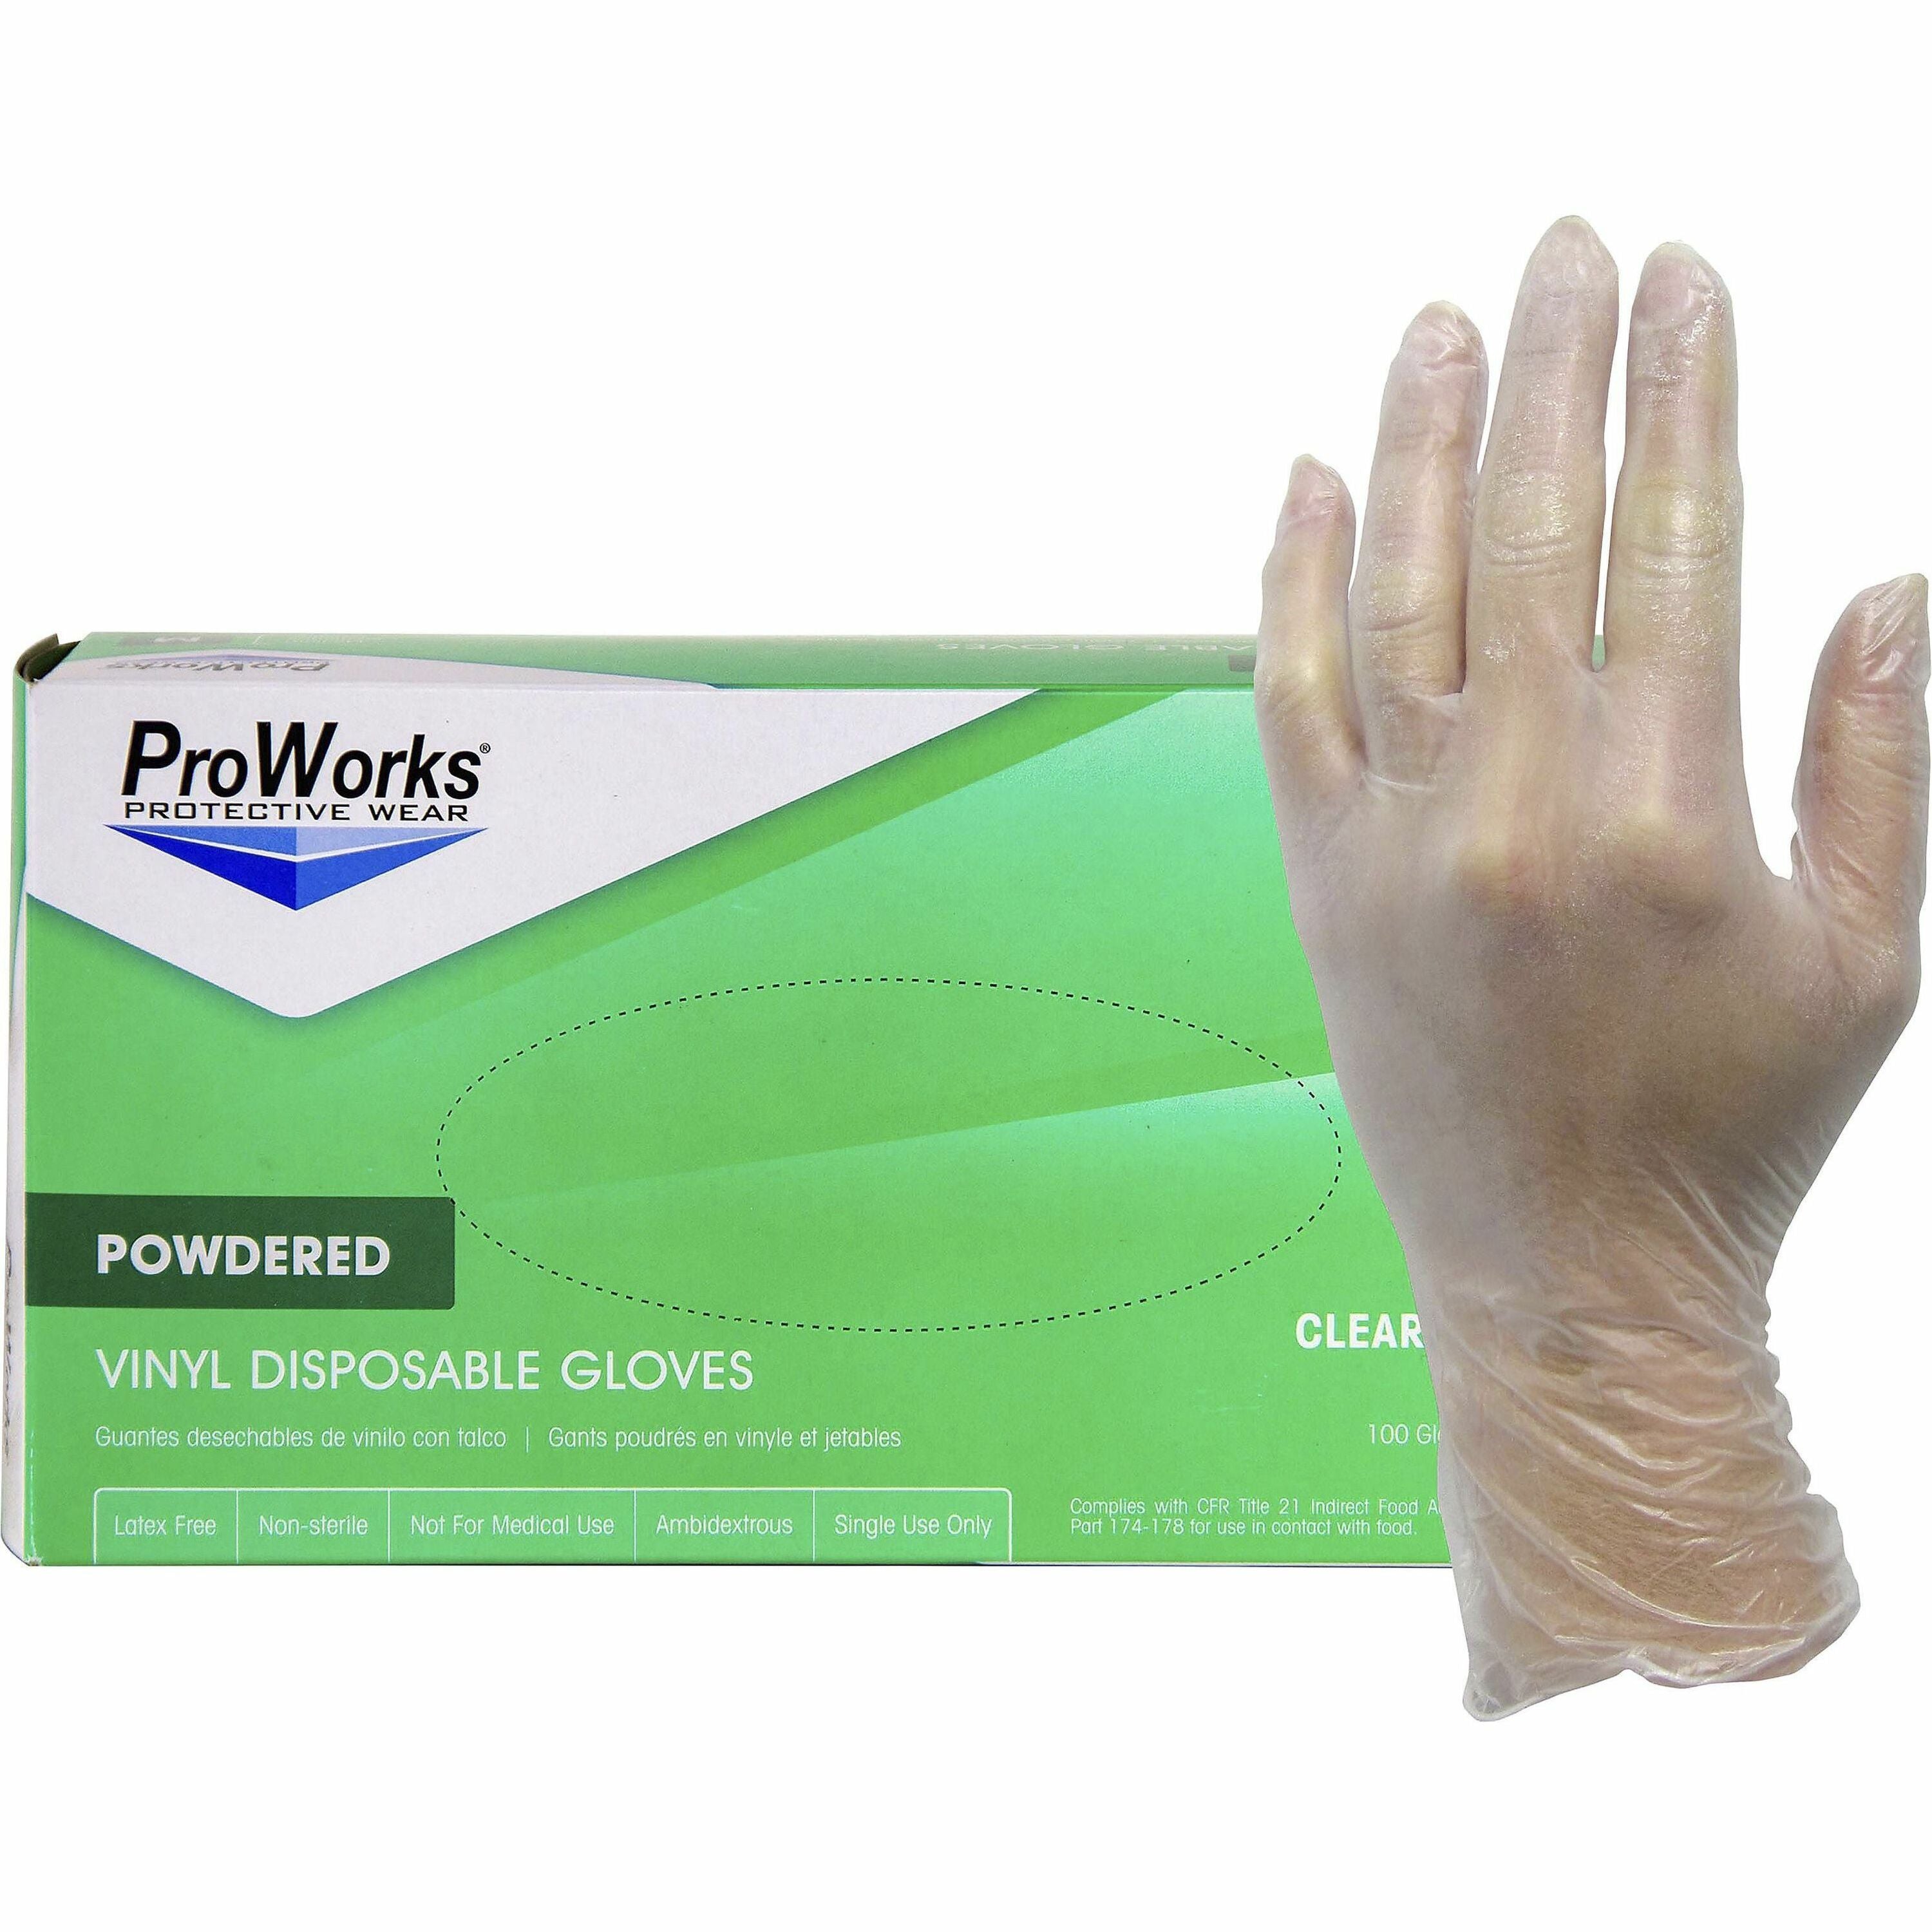 ProWorks Vinyl Powdered Industrial Gloves - Medium Size - Vinyl - Clear - Powdered, Non-sterile - For Industrial, General Purpose, Construction, Food Processing, Food Service, Hospitality - 100 / Box - 3 mil Thickness - 9" Glove Length